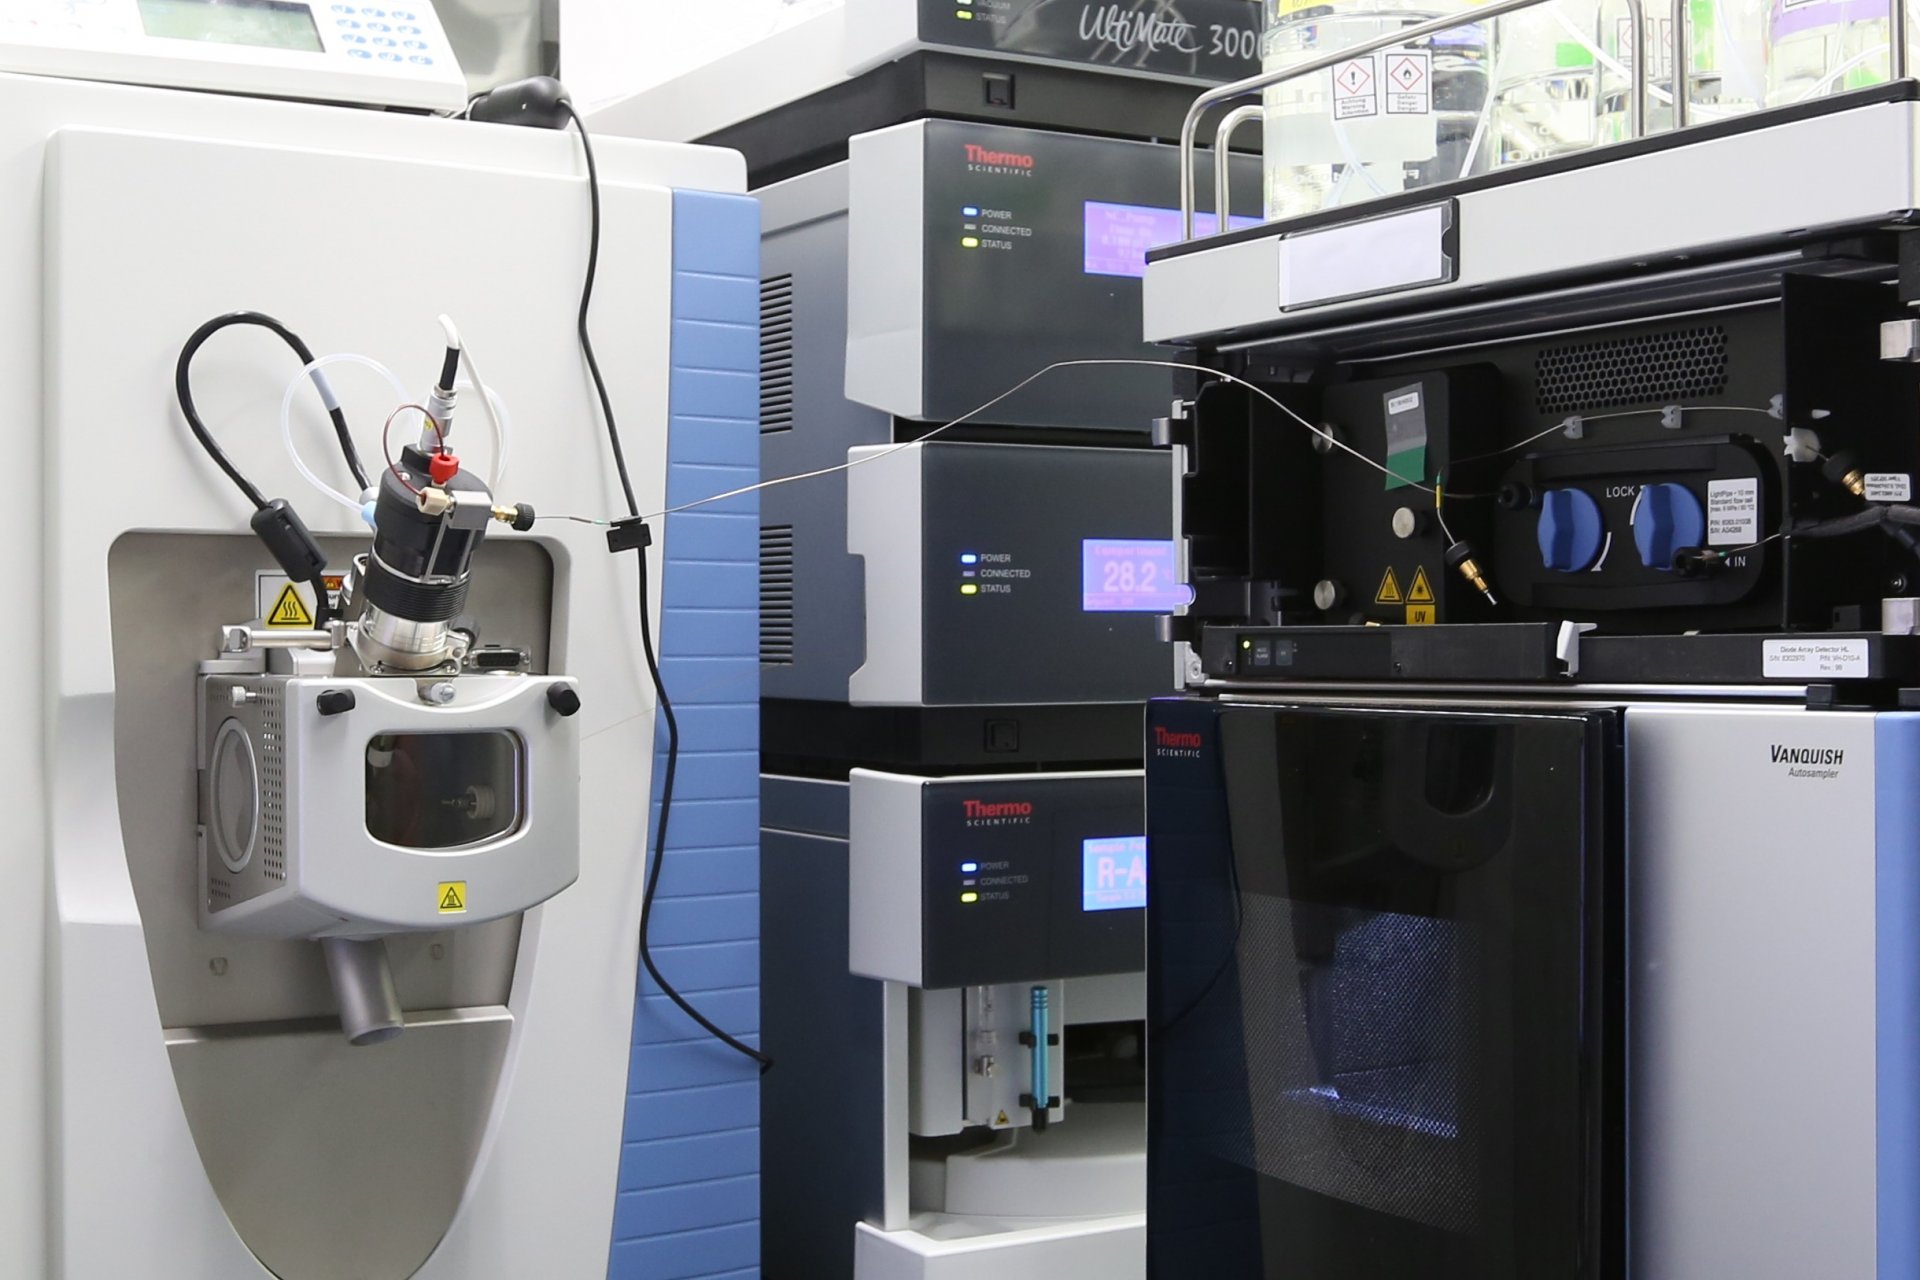 High performance liquid chromatograph with mass spectrometry (©Max Planck Institute for Marine Microbiology, K. Matthes)